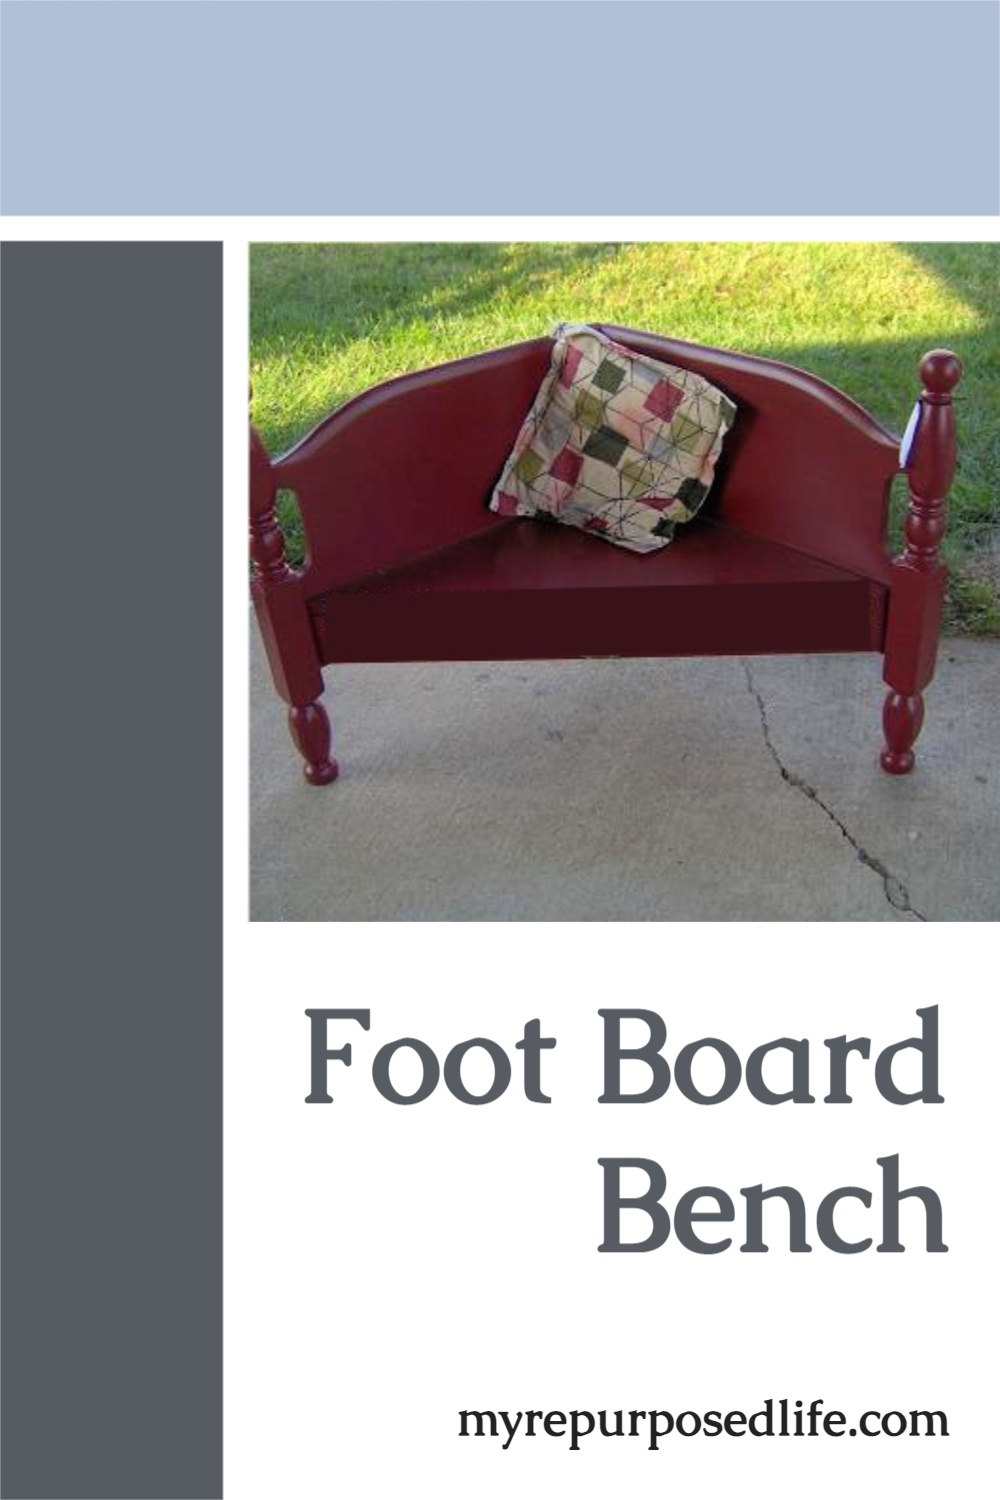 How to make a cute little corner bench from a full sized foot board. Large headboards or foot boards are great for making corner benches. #MyRepurposedLife #repurpose #upcycle #footboard #bed #corner #bench #diy #tutorial via @repurposedlife